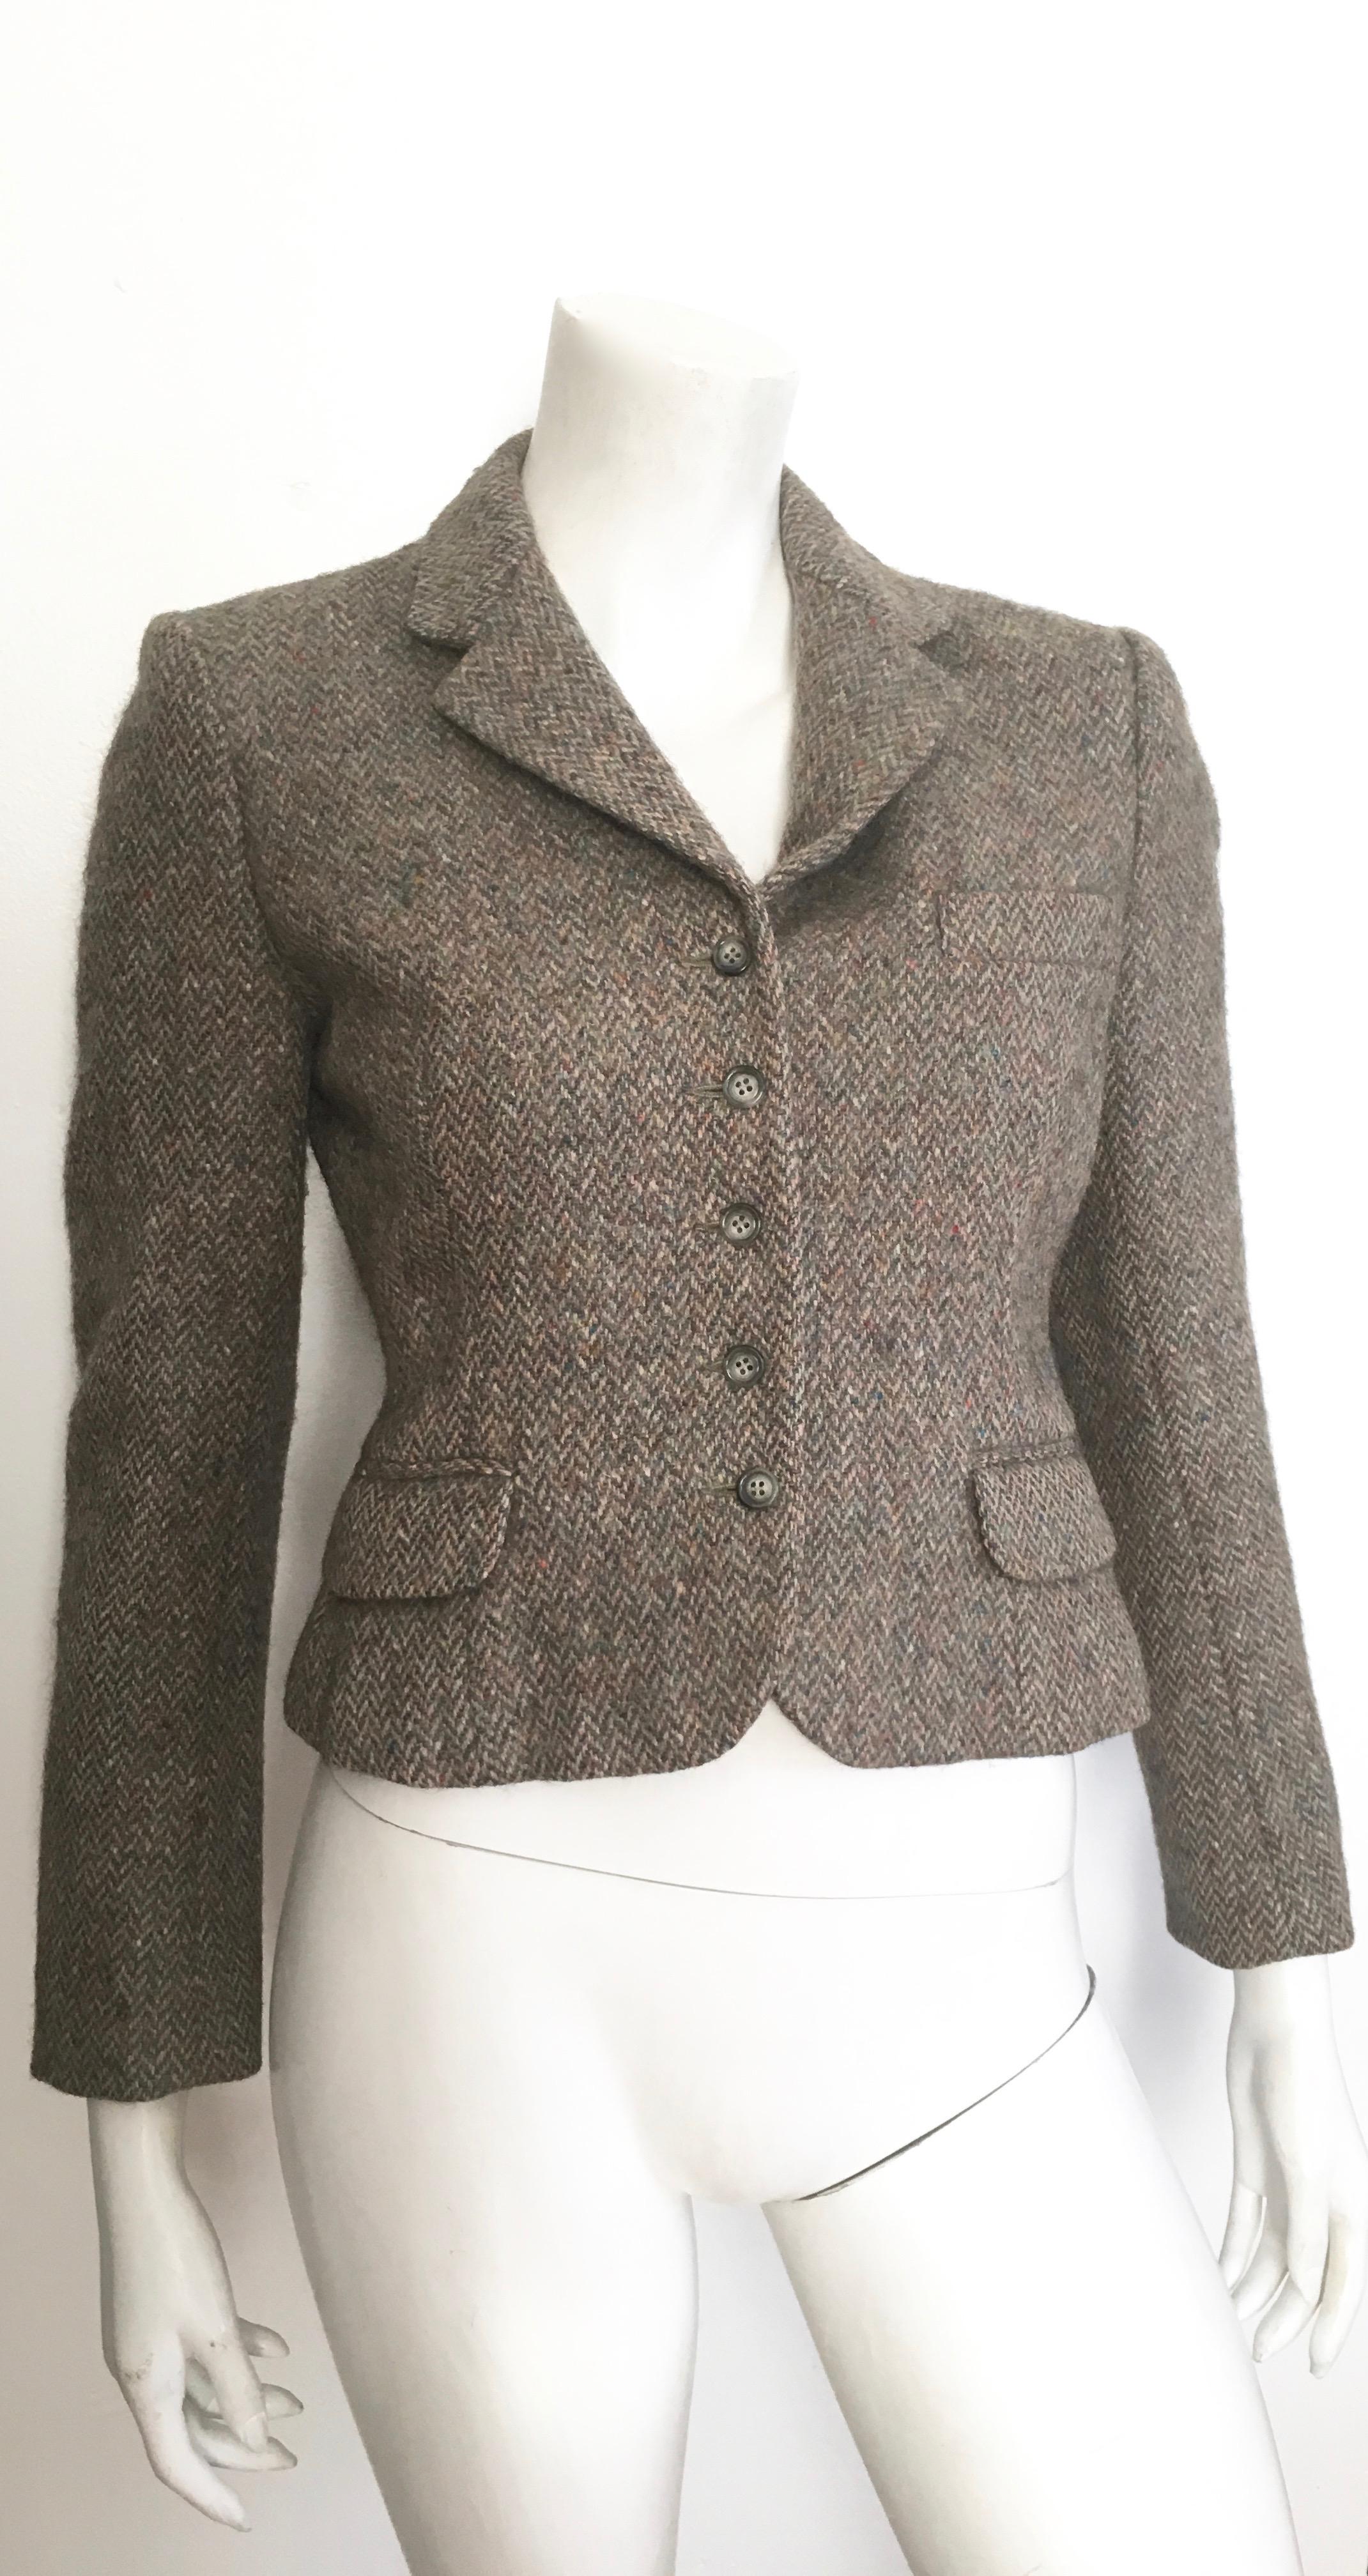 Pierre Cardin for Bloomingdale's 1960s wool cropped jacket is labeled a size 6 but fits like a size 4.  Fits Matilda the Mannequin who wears a size 4 perfectly, this is not a modern day size 6.  The wool fabric was imported from Ireland. 
Jacket is